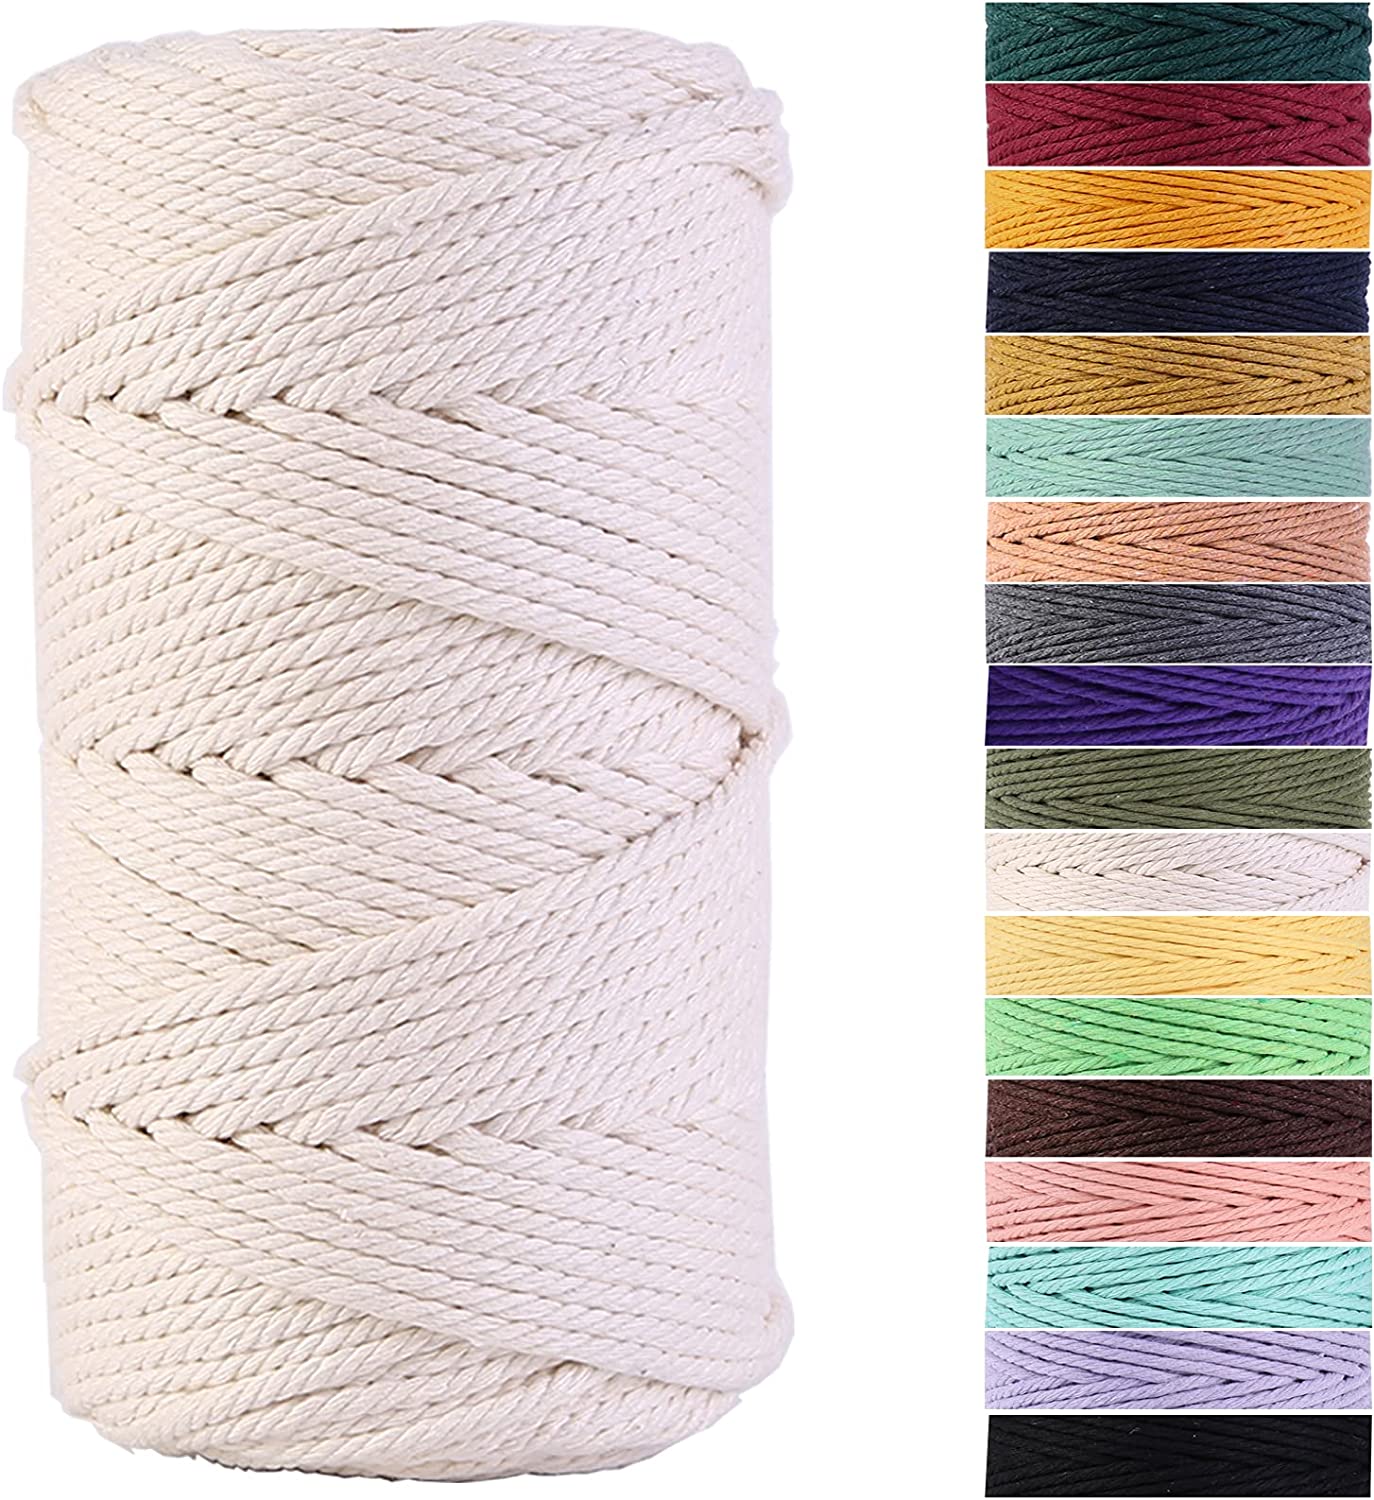 XKDOUS Macrame Cord 4mm x 150Yards, Natural Cotton Macrame Rope, Cotton  Cord for Wall Hanging, Plant Hangers, Crafts, Knitting